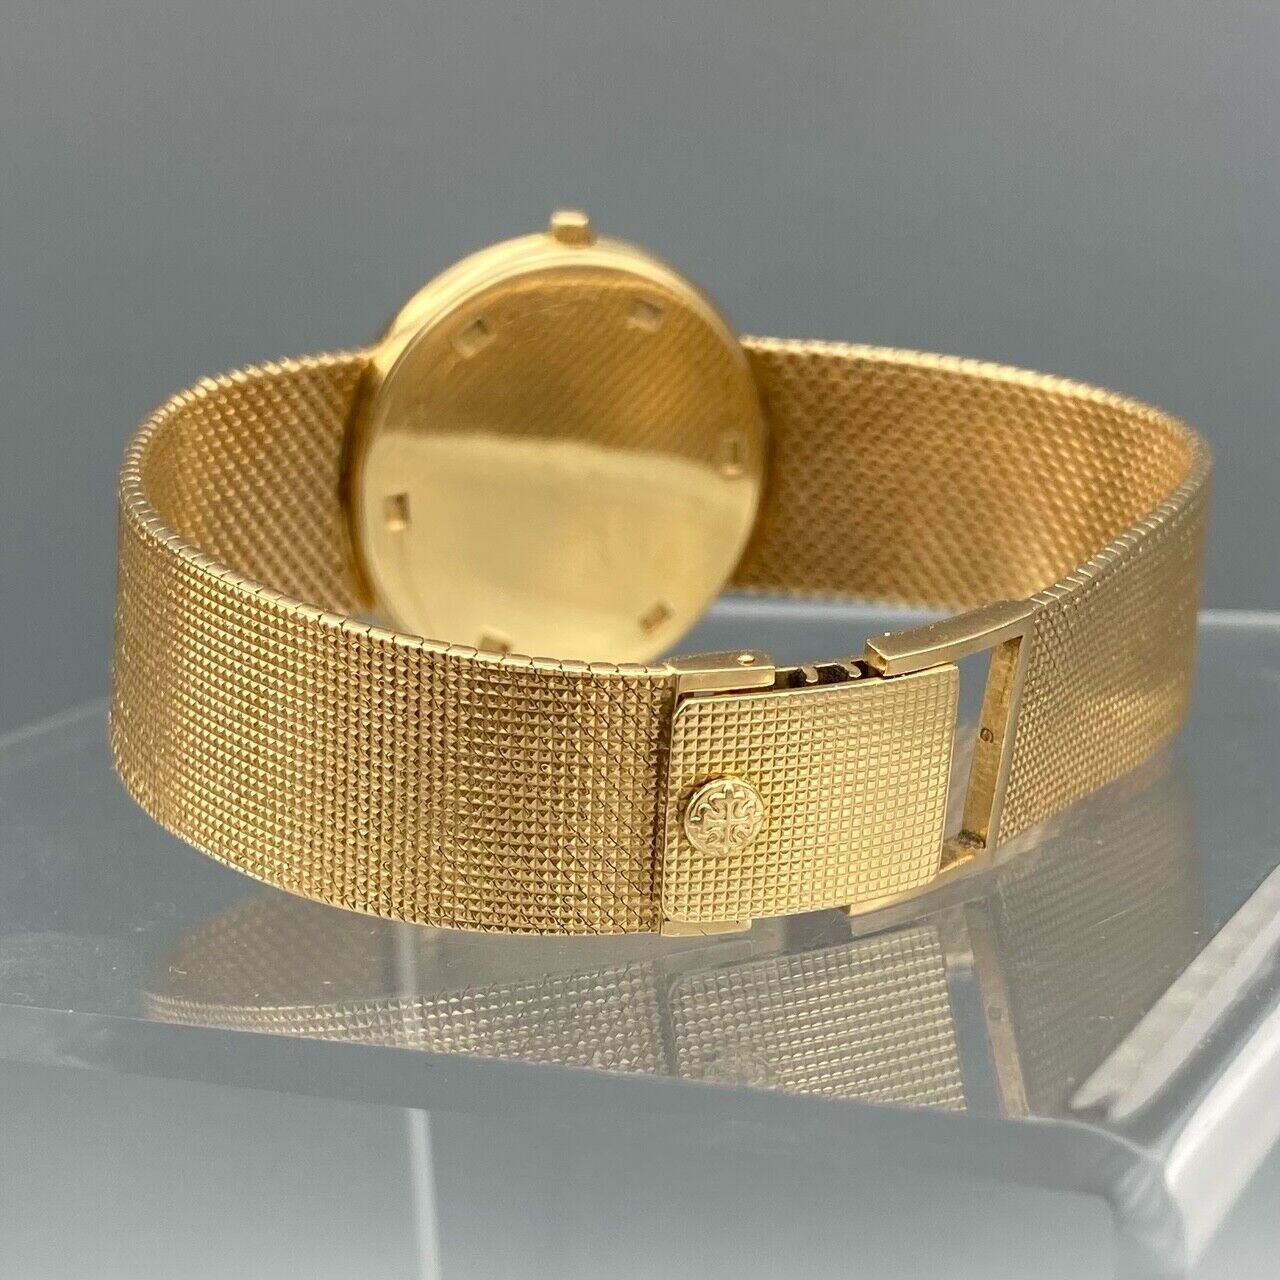 Patek Philippe Calatrava Sold by Cartier in 18k Yellow Gold Mechanical 3520